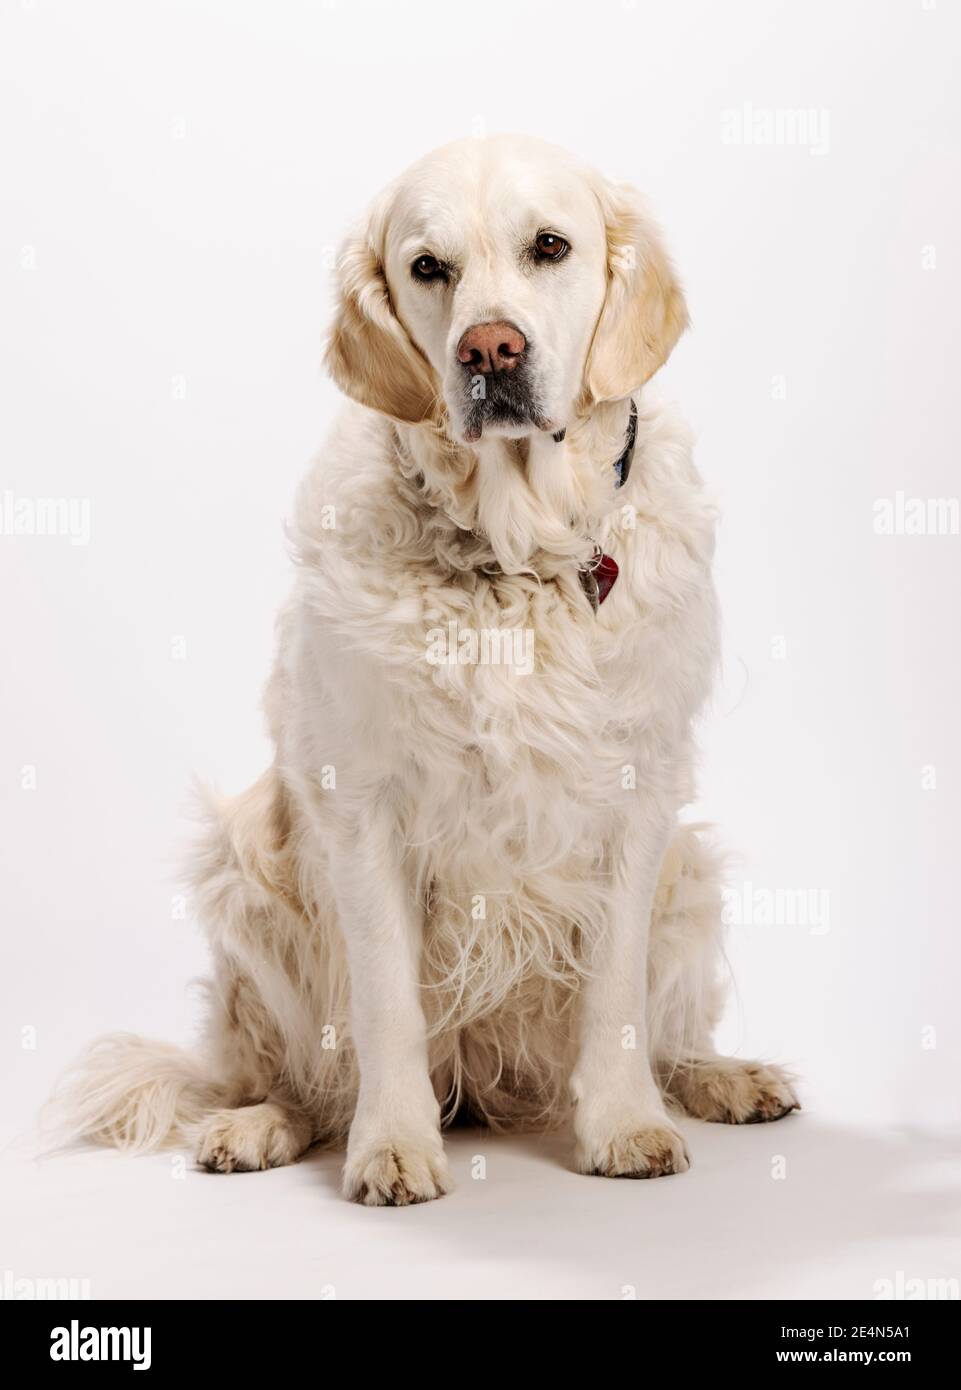 Eight year old Platinum, or Cream colored Golden Retriever dog on white photography studio background. Stock Photo